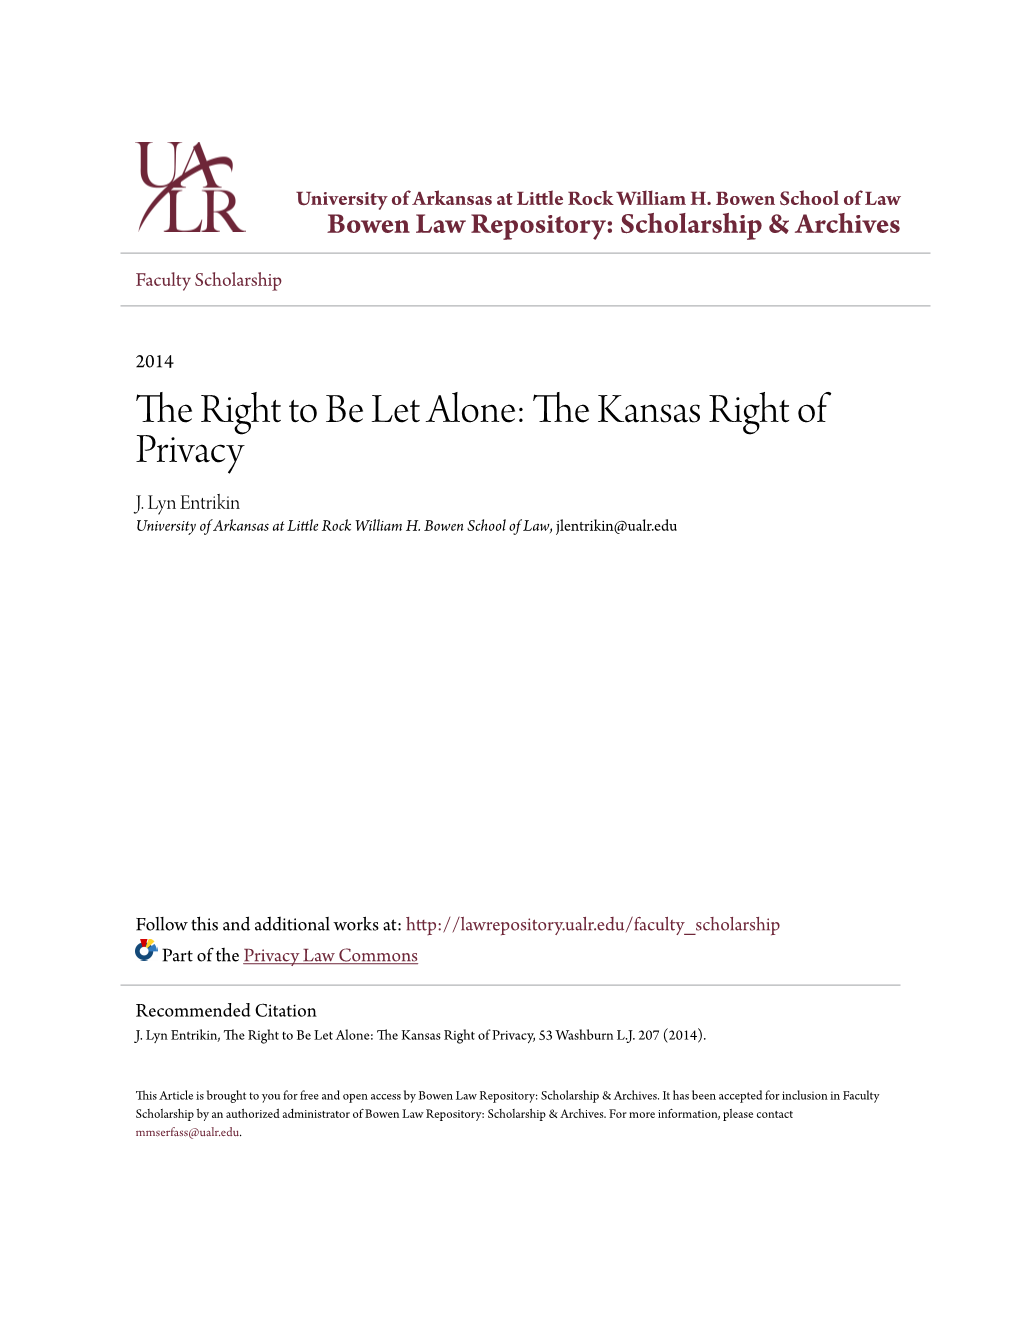 The Right to Be Let Alone: the Kansas Right of Privacy J